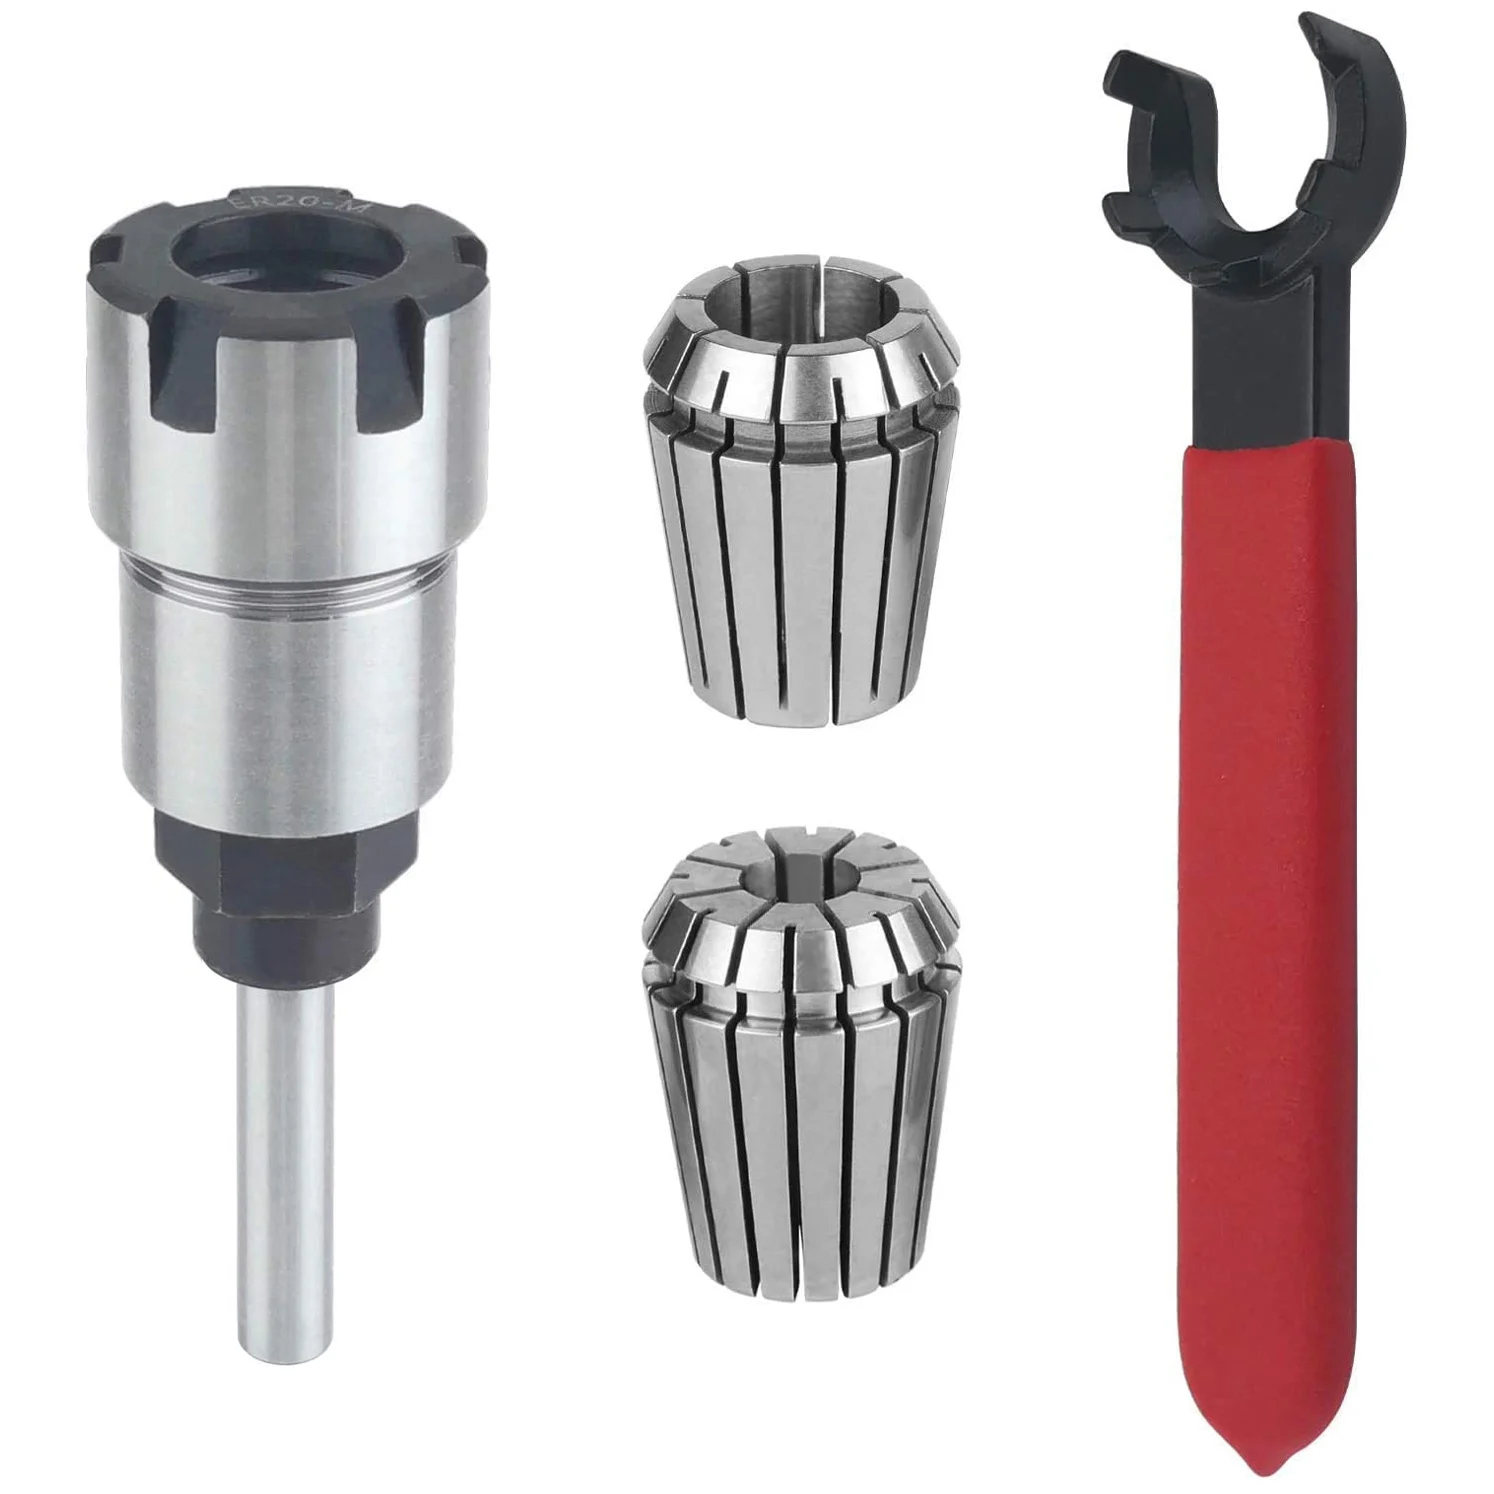 

Shank Router Bit Colle Collet Extension Chuck Converter Adapter,Convert 1/2,1/4-Inch Shank Bit with ER20 Spring Collet